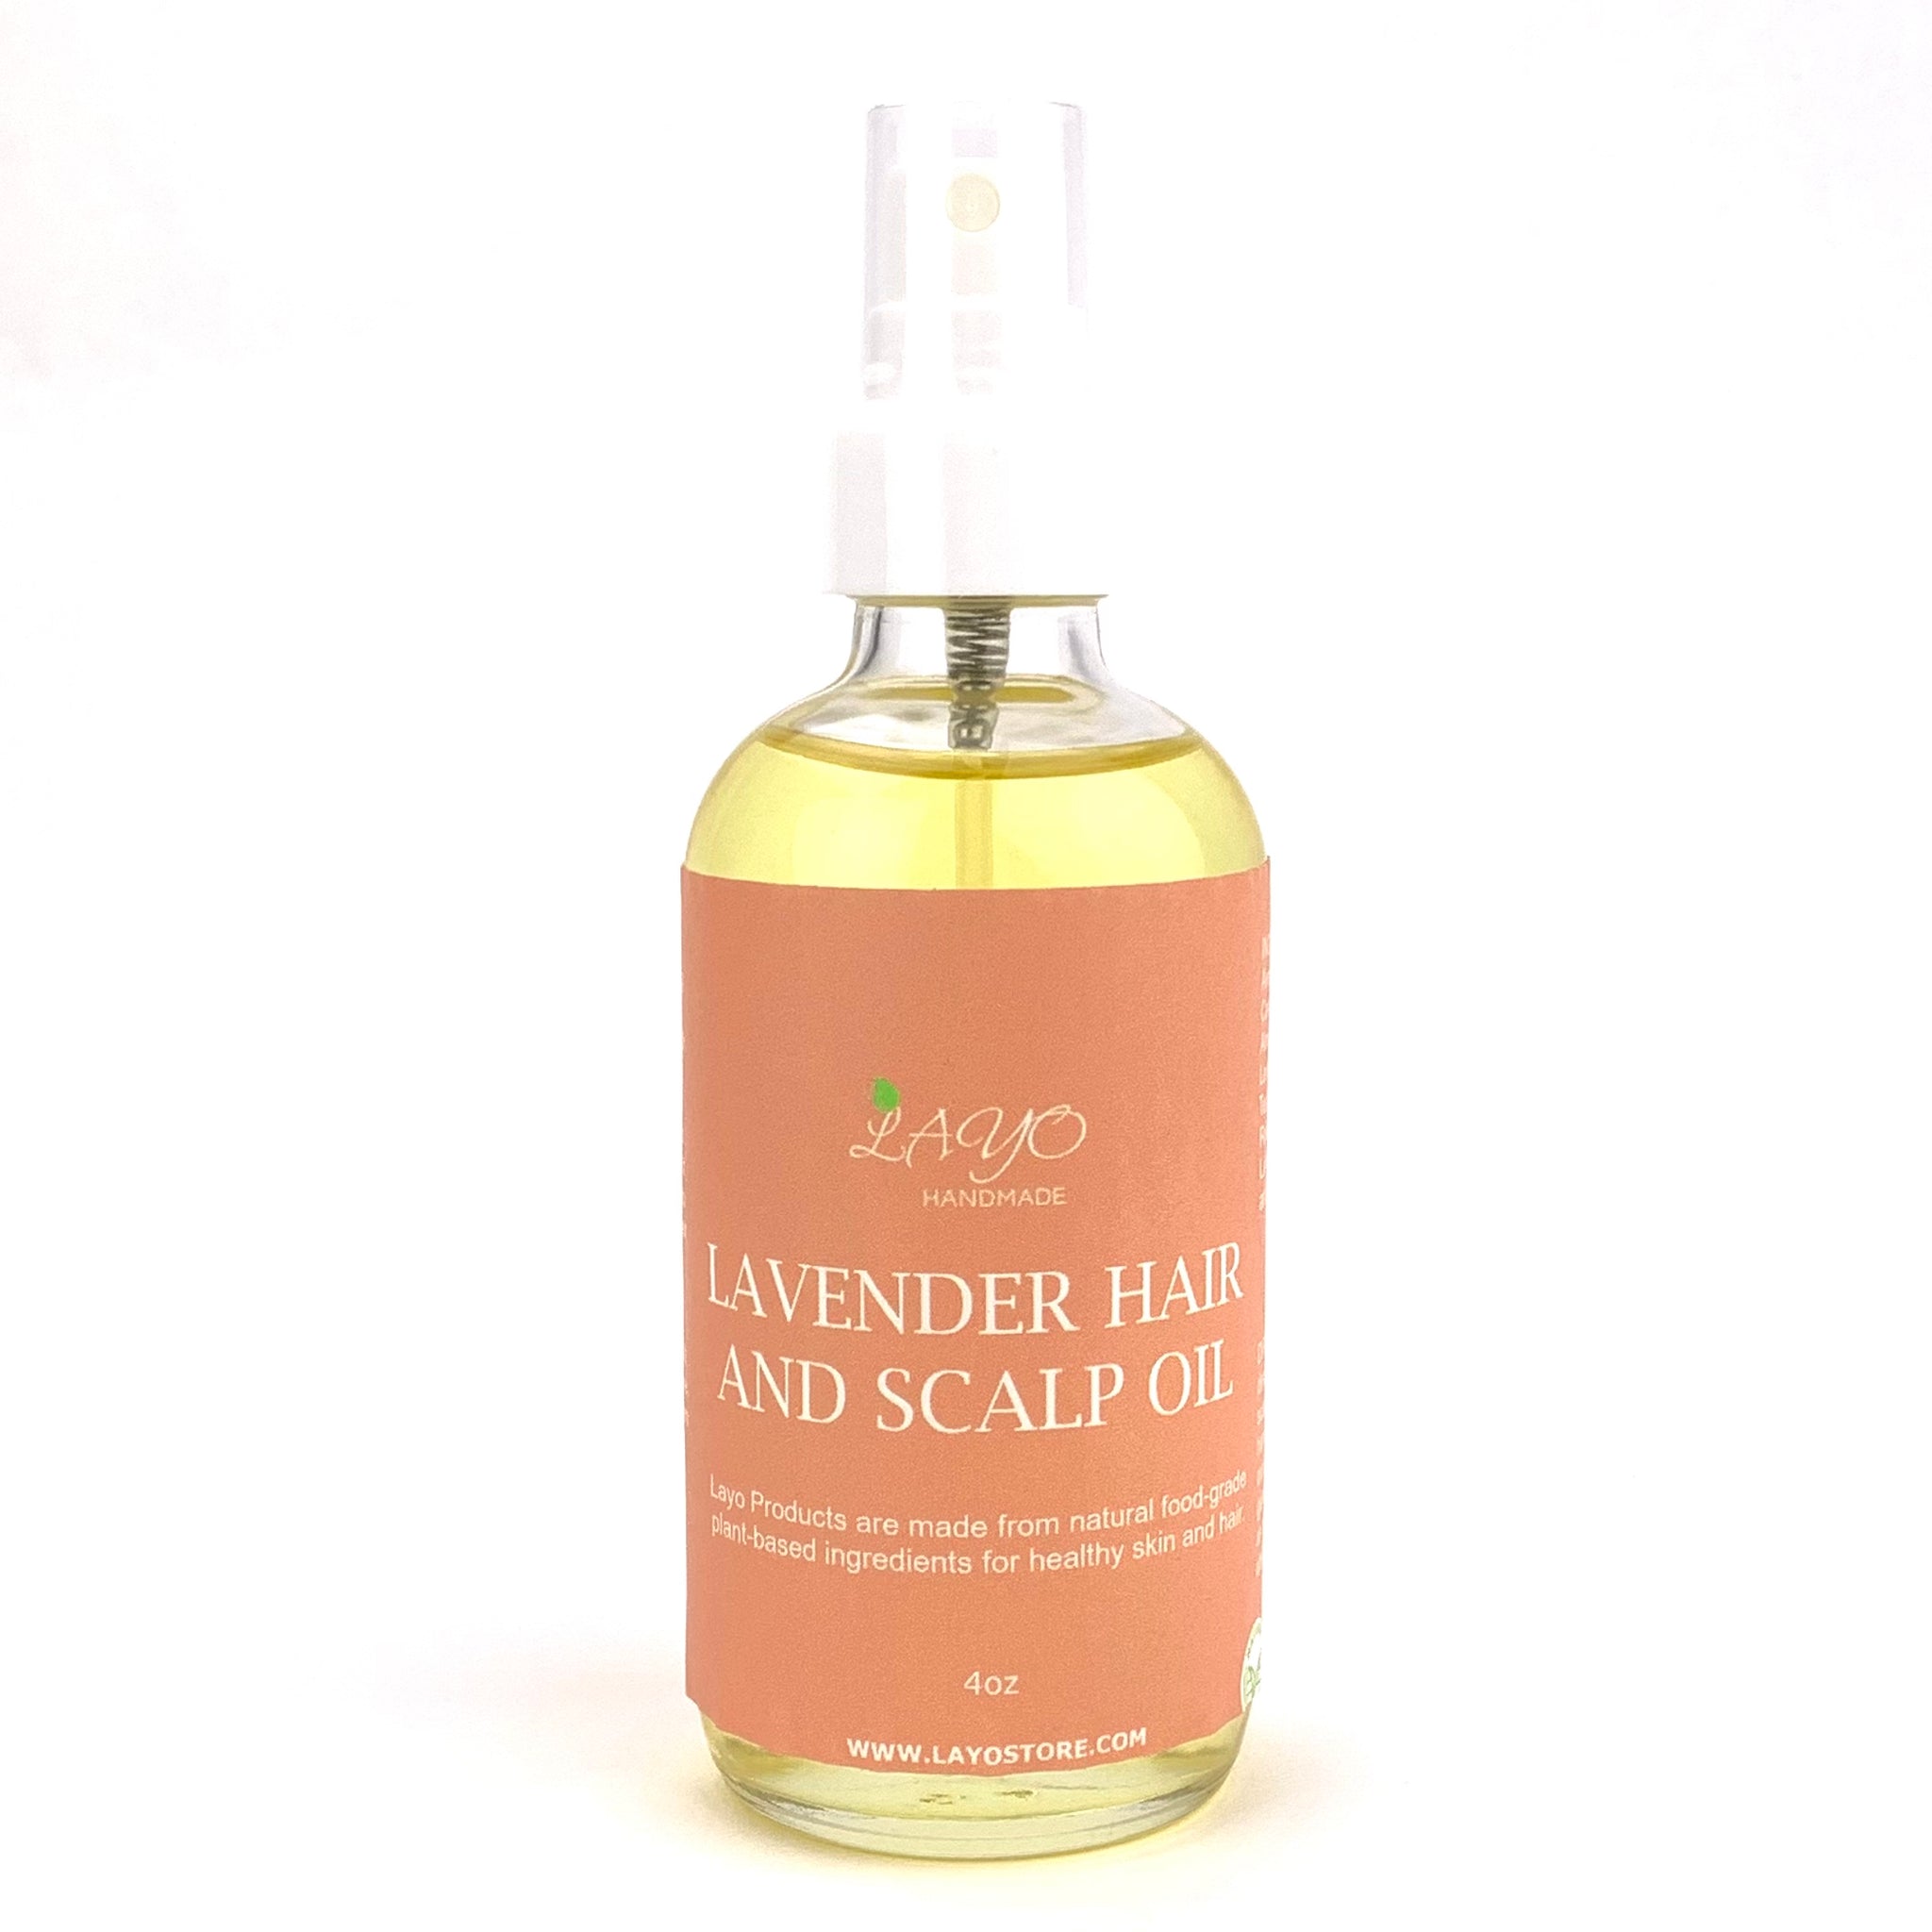 Lavender Hair and Scalp Oil